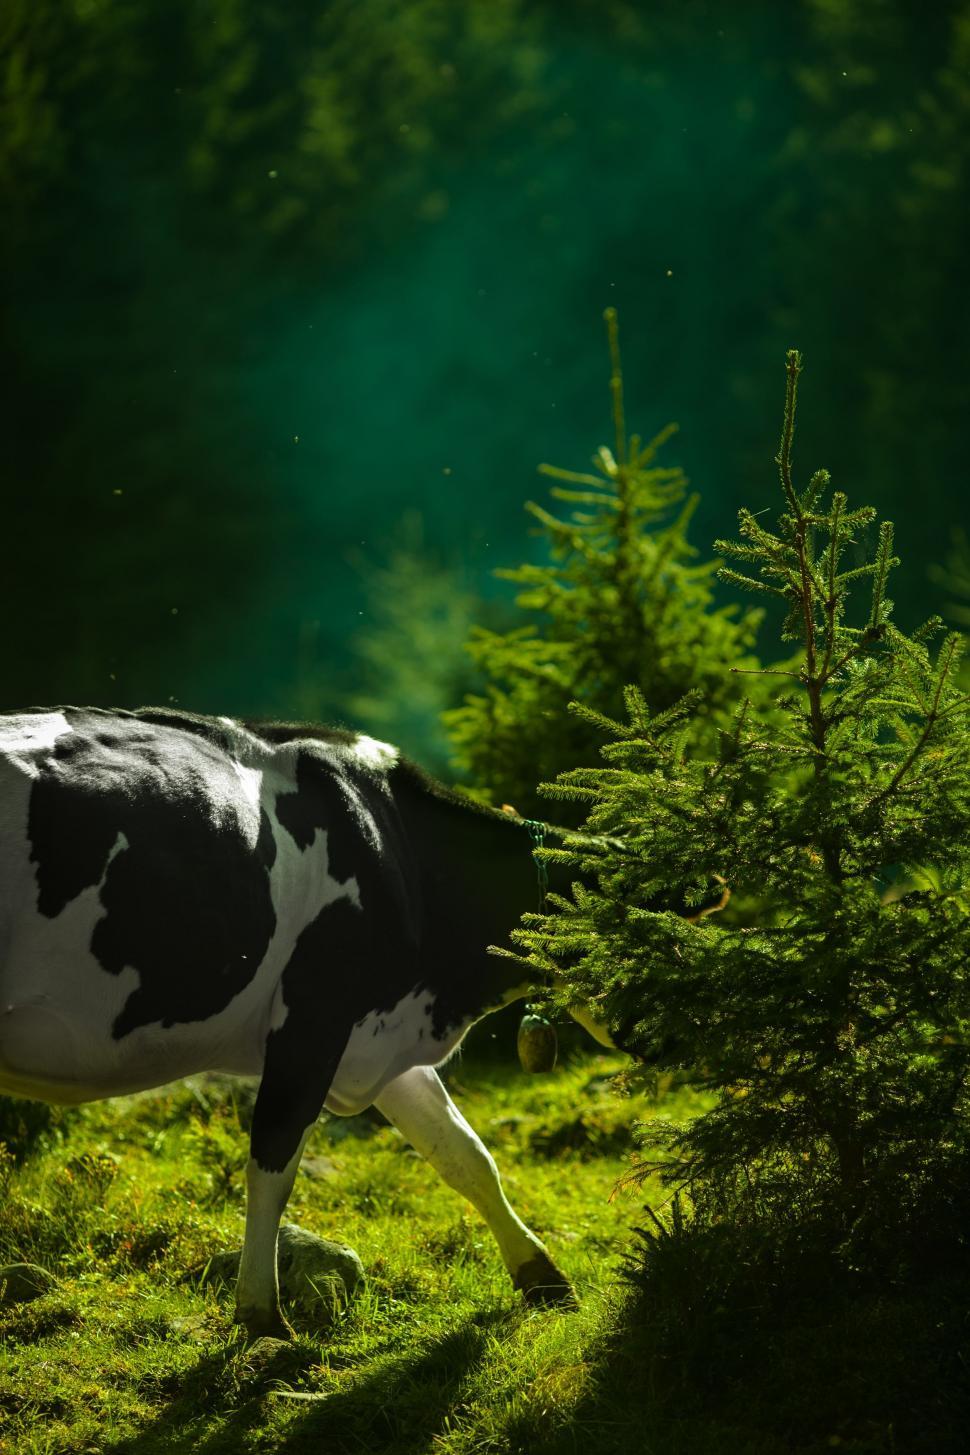 Free Image of Black and White Cow Walking Through Grass 